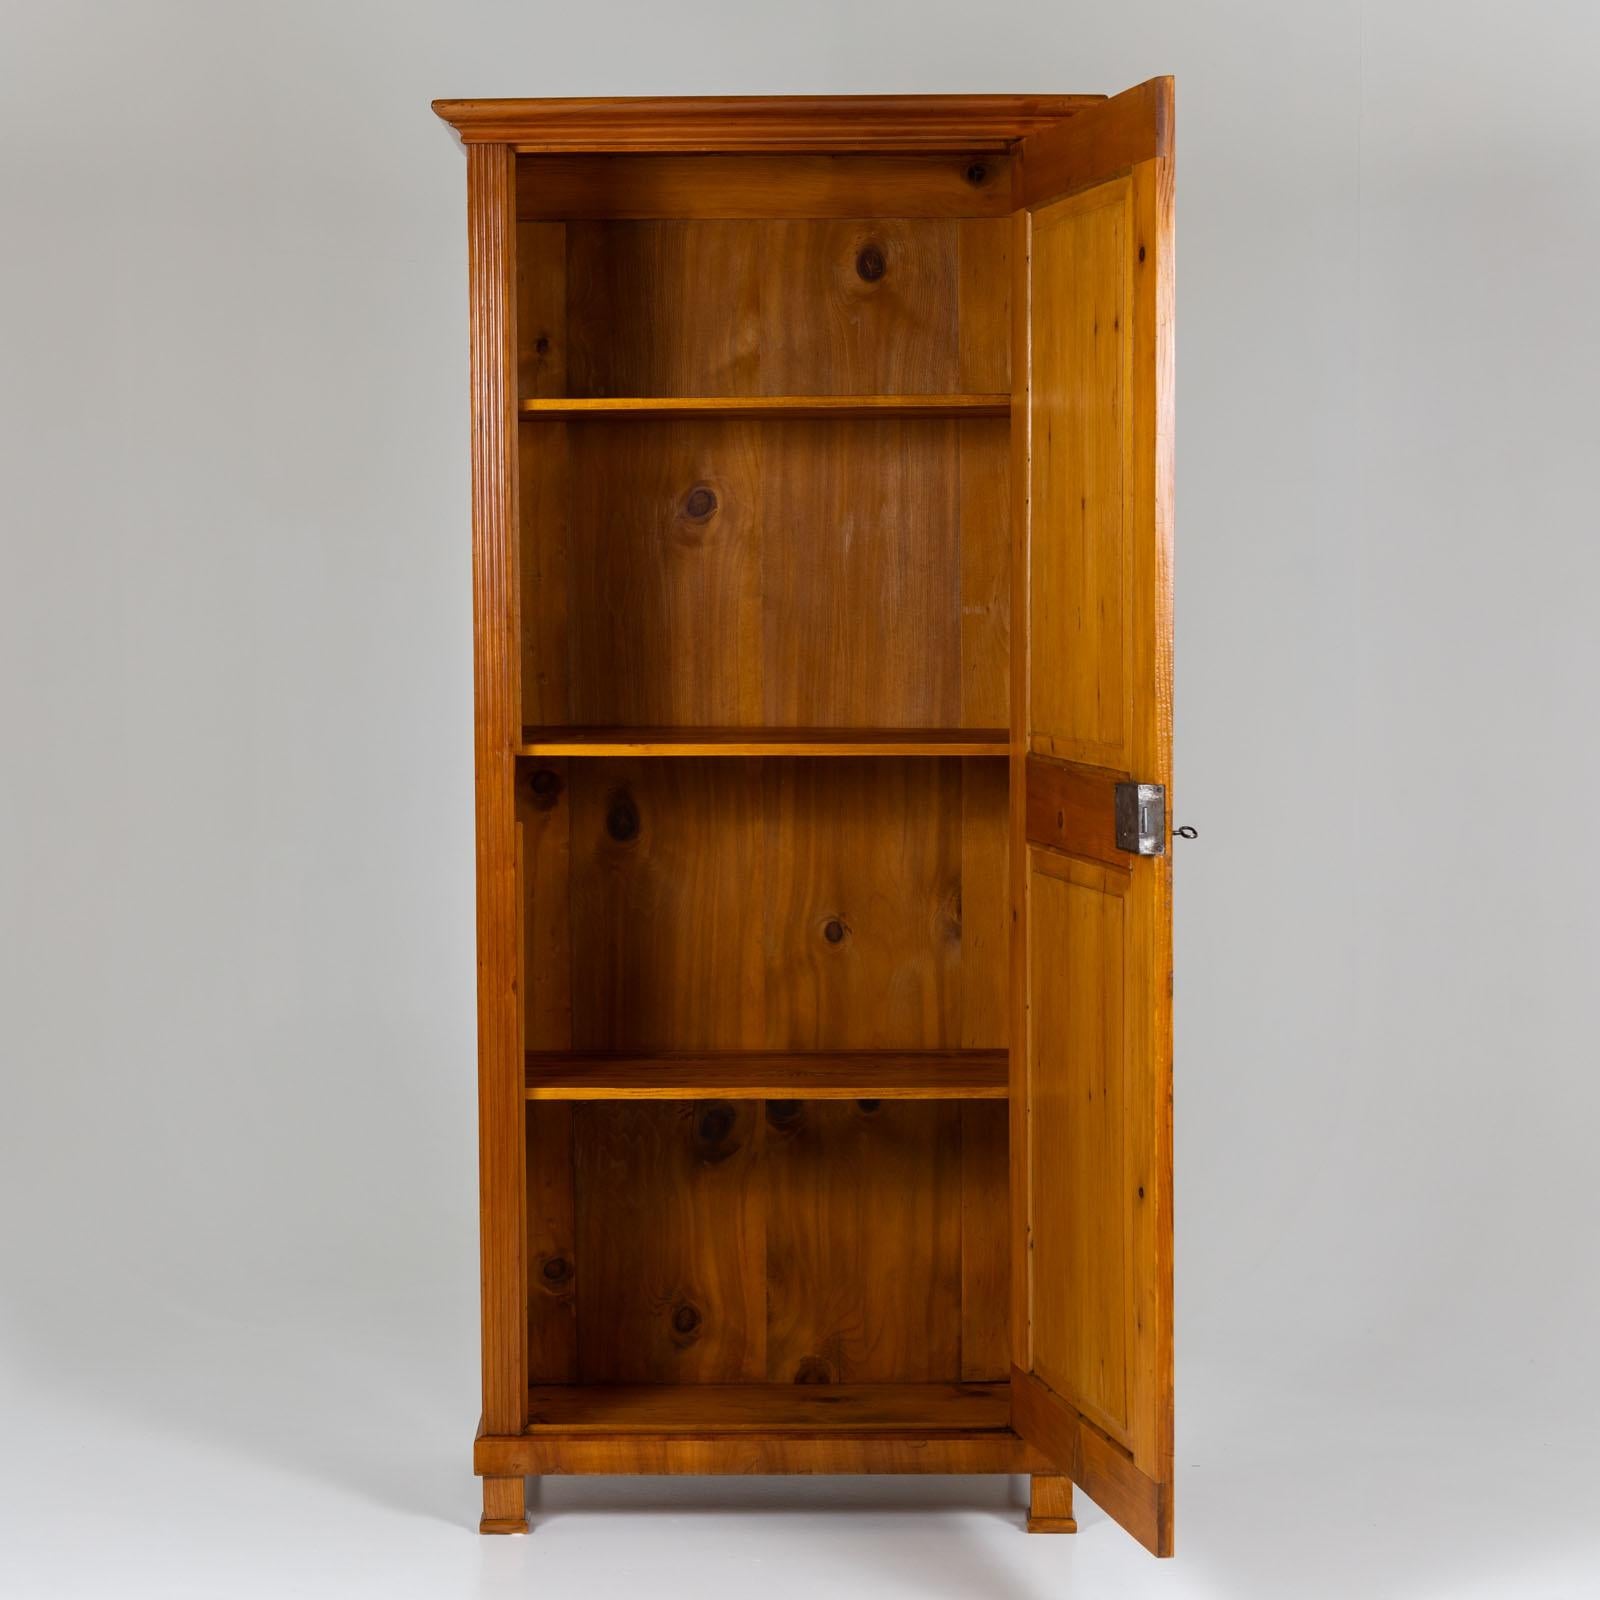 Biedermeier linen cupboard in cherry veneer with one door and square feet. The door is divided into two panels and the pilaster strips are fluted. The inside of the cupboard is fitted with three shelves and has been restored and polished by hand. 